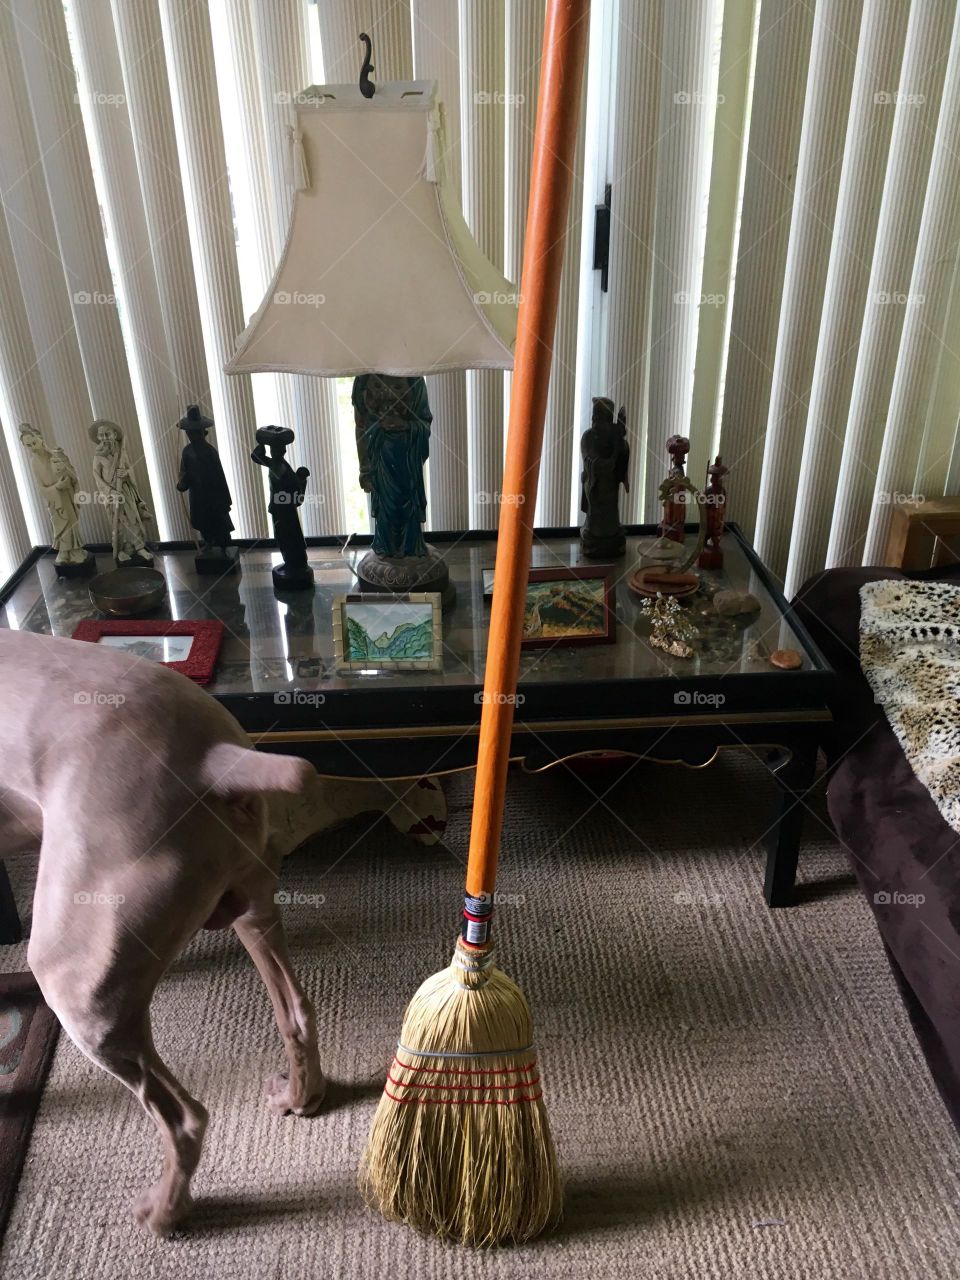 Spring Equinox. On the back porch.  My broom stands upright without assistance. Perfect balance. Samson the Weimaraner’s butt also captured. 